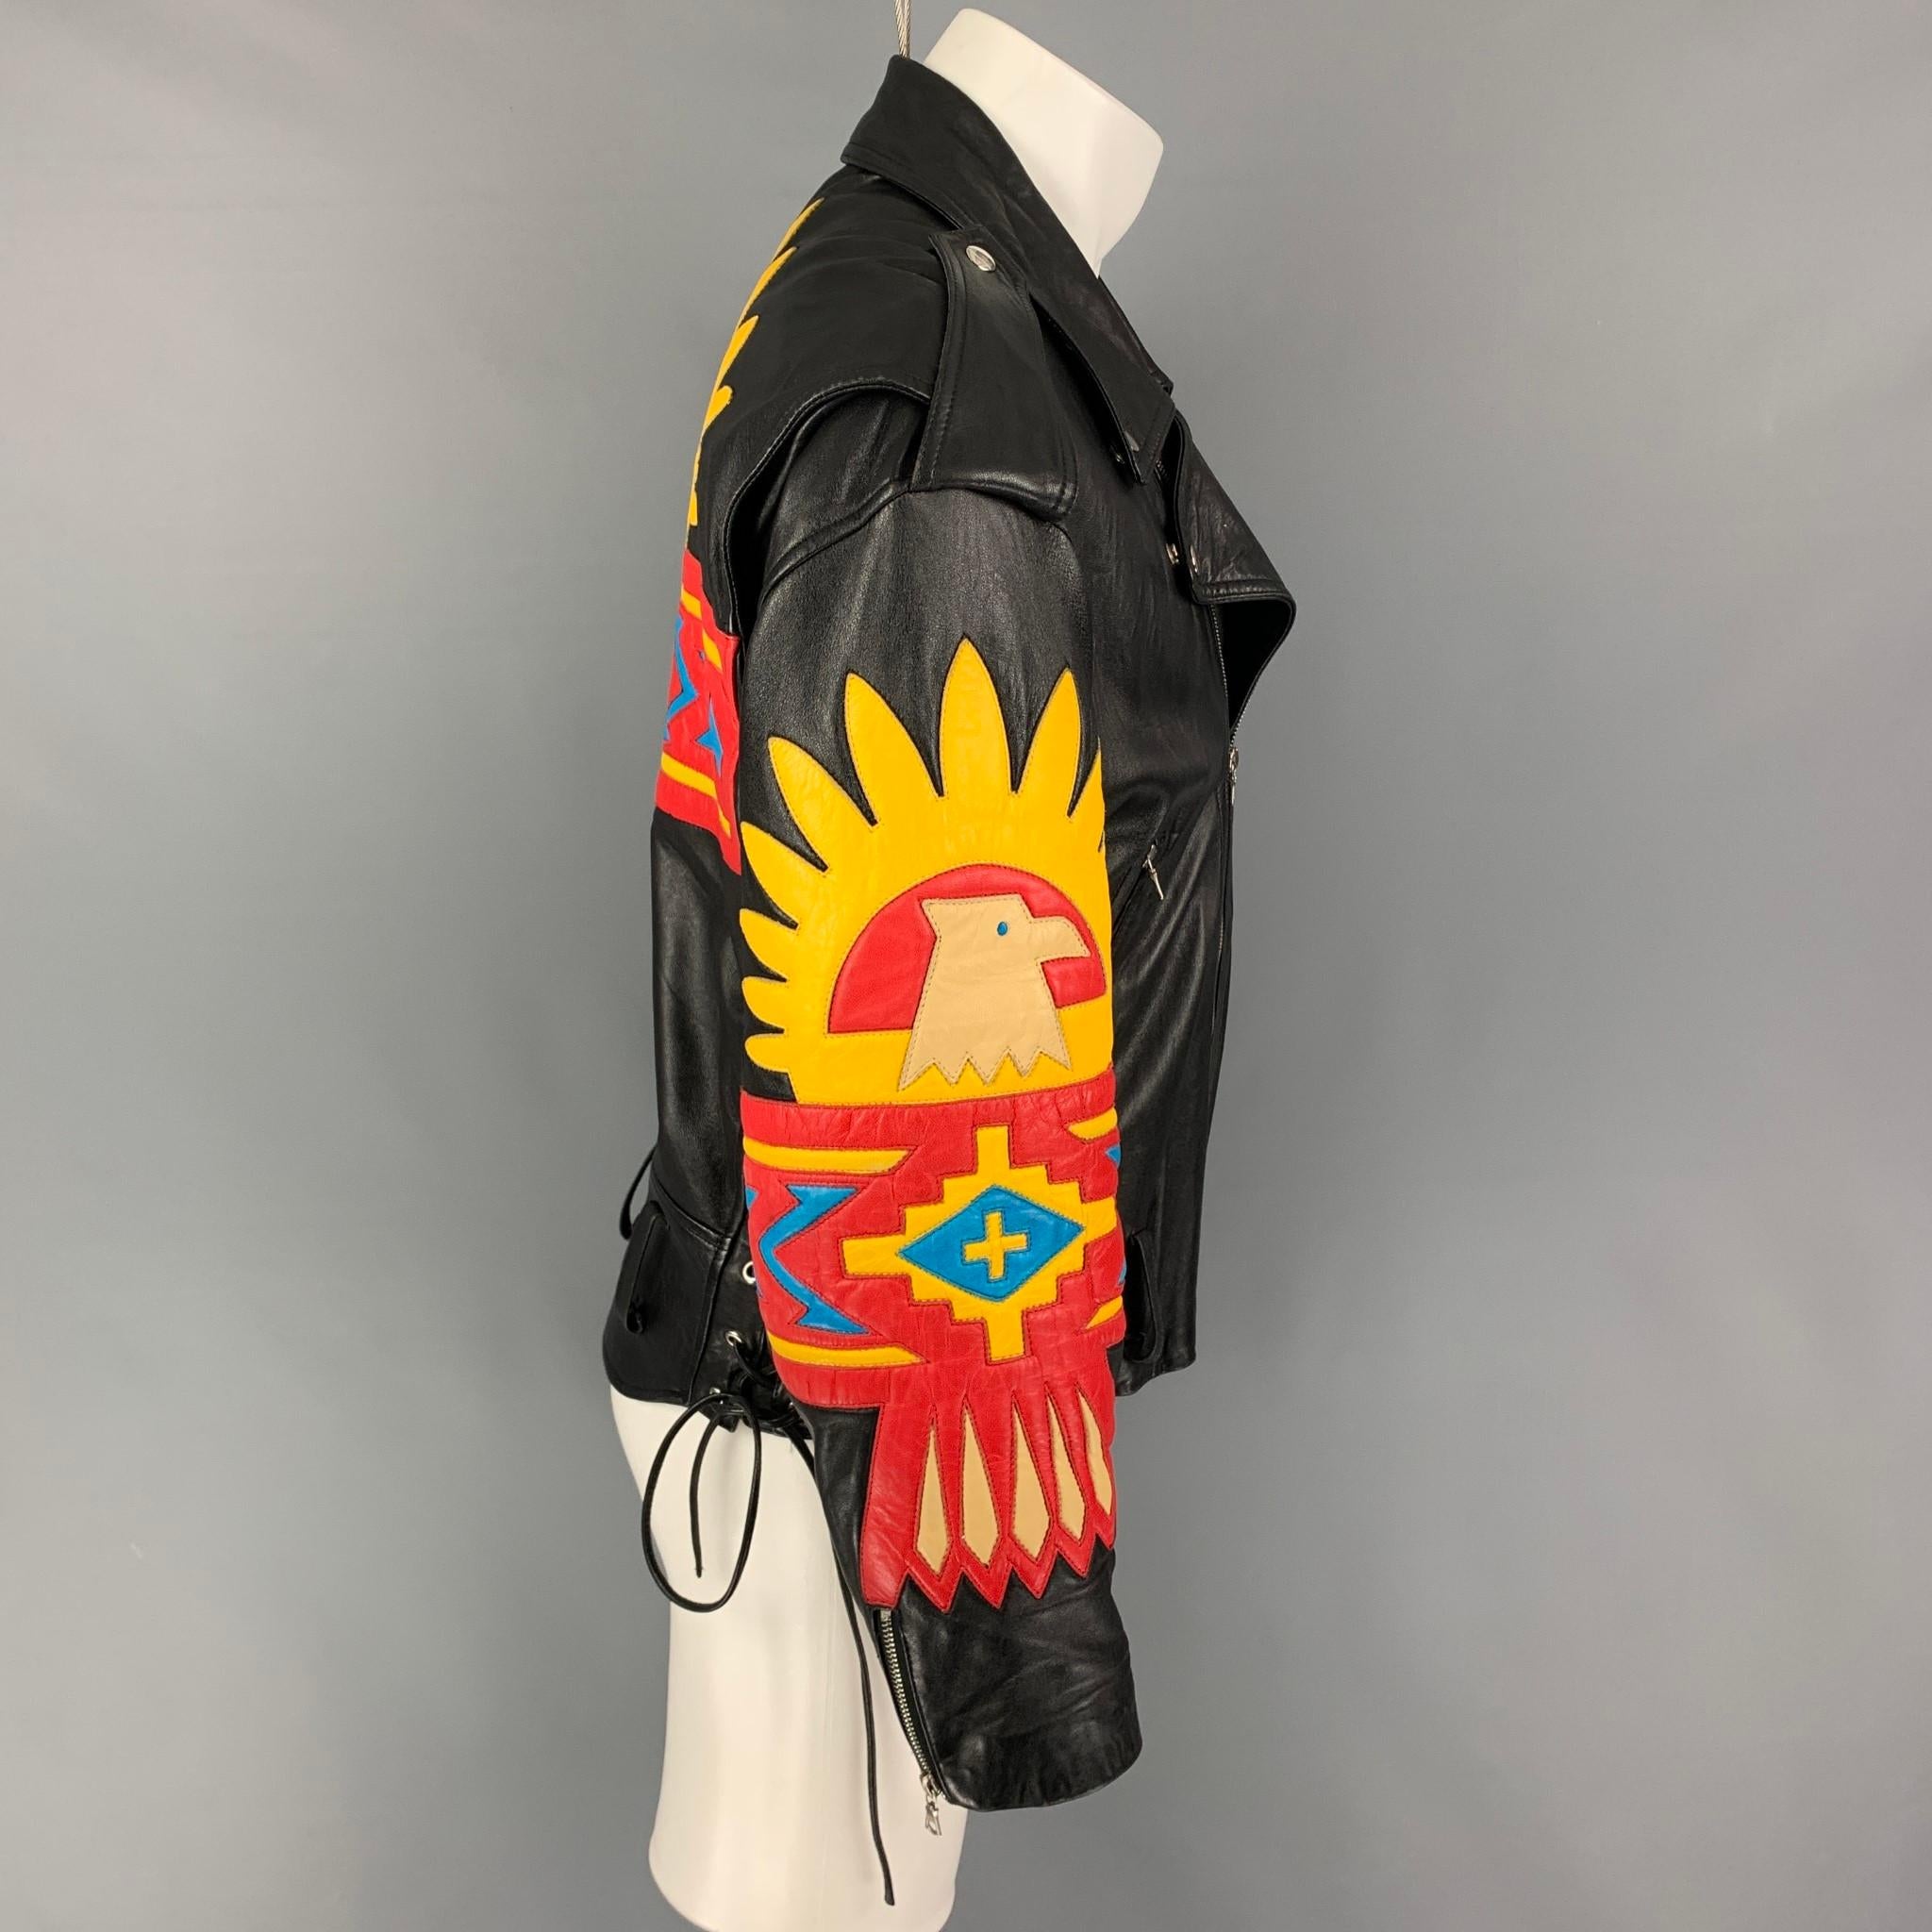 NORTH BEACH LEATHER x MICHAEL HOBAN jacket comes in a black leather with multi-color applique designs featuring a biker style, silver tone hardware, epaulettes, zipper pockets, side self-toe straps, and a zip up closure. 

Very Good Pre-Owned